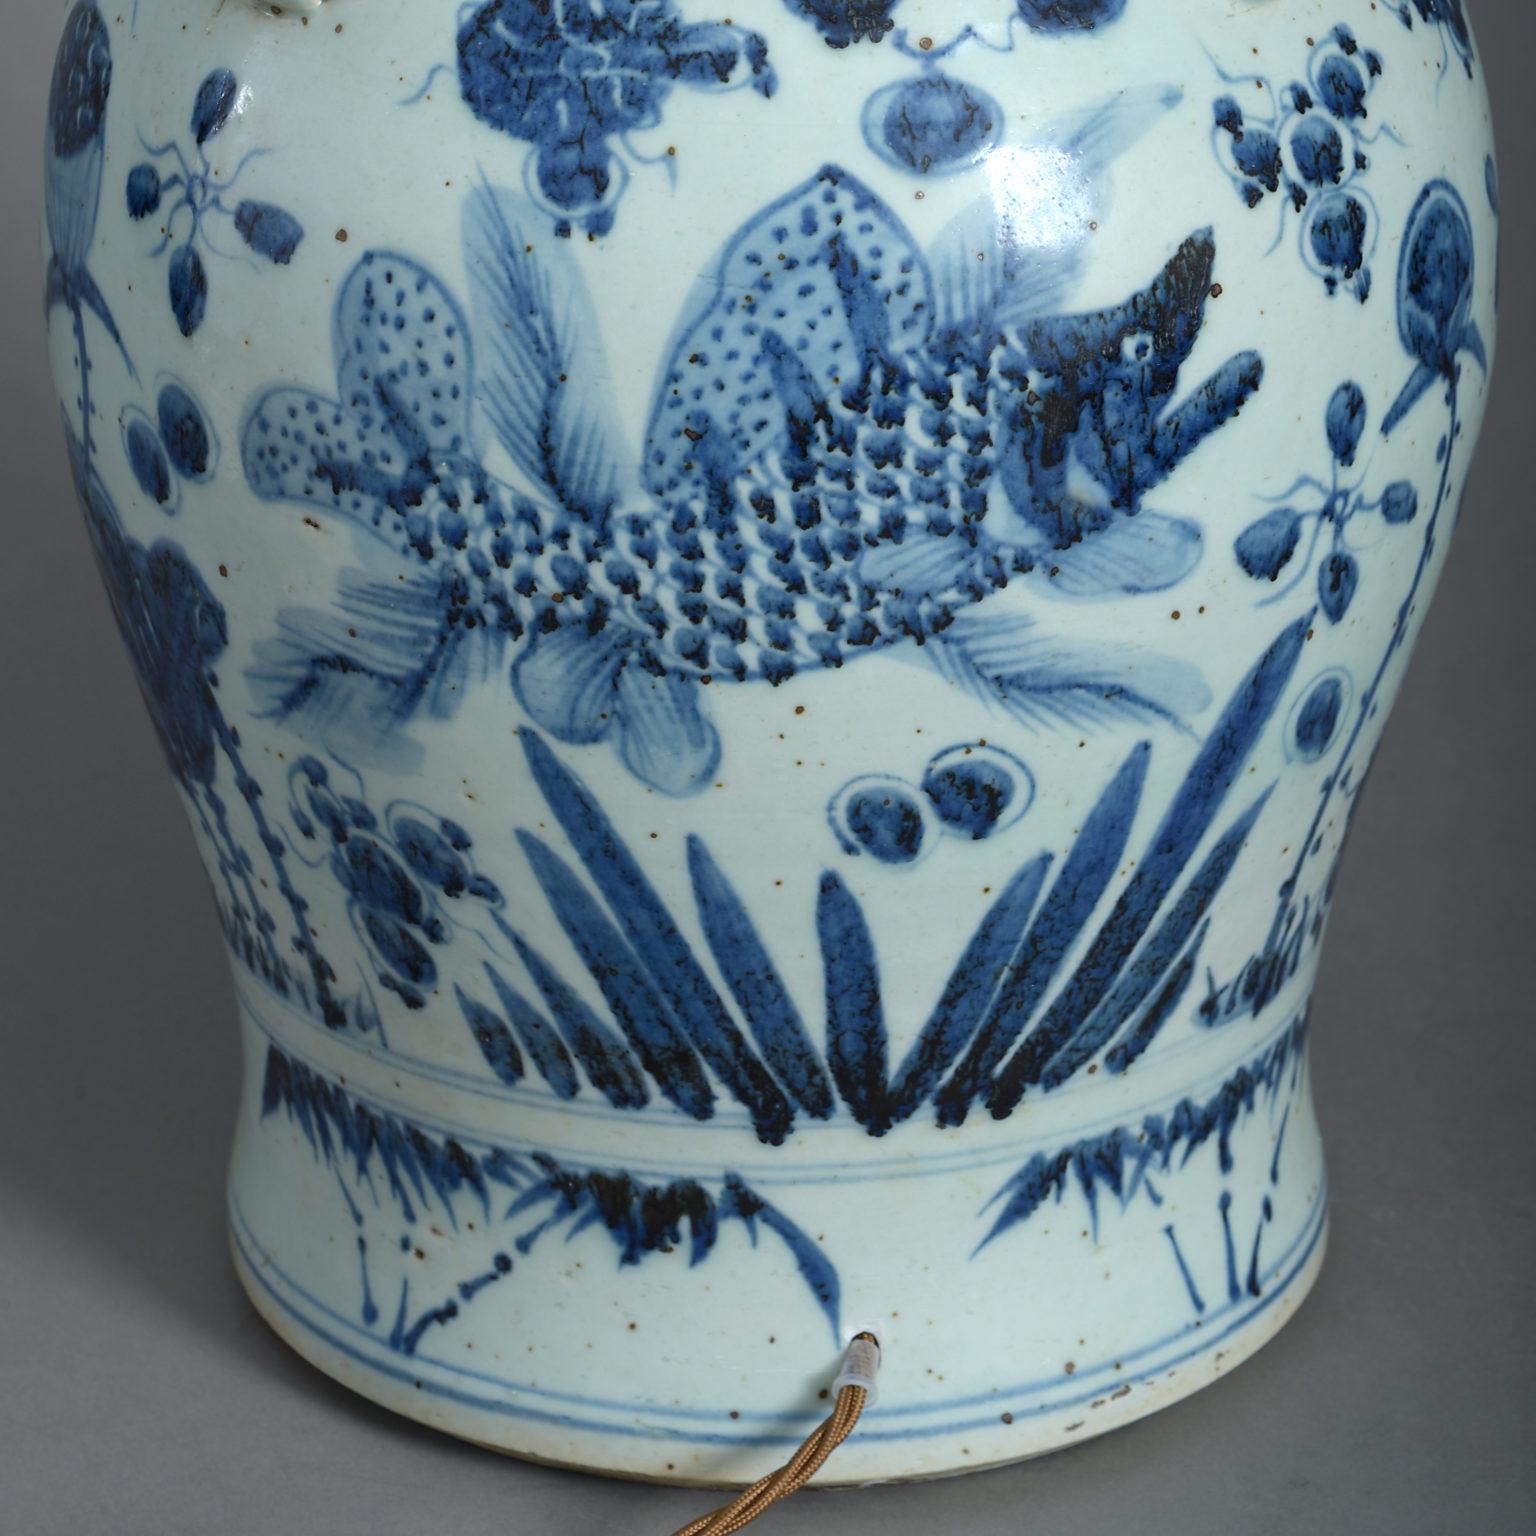 Chinese Blue and White Porcelain Vase Lamp Decorated with Fish and Seaweed